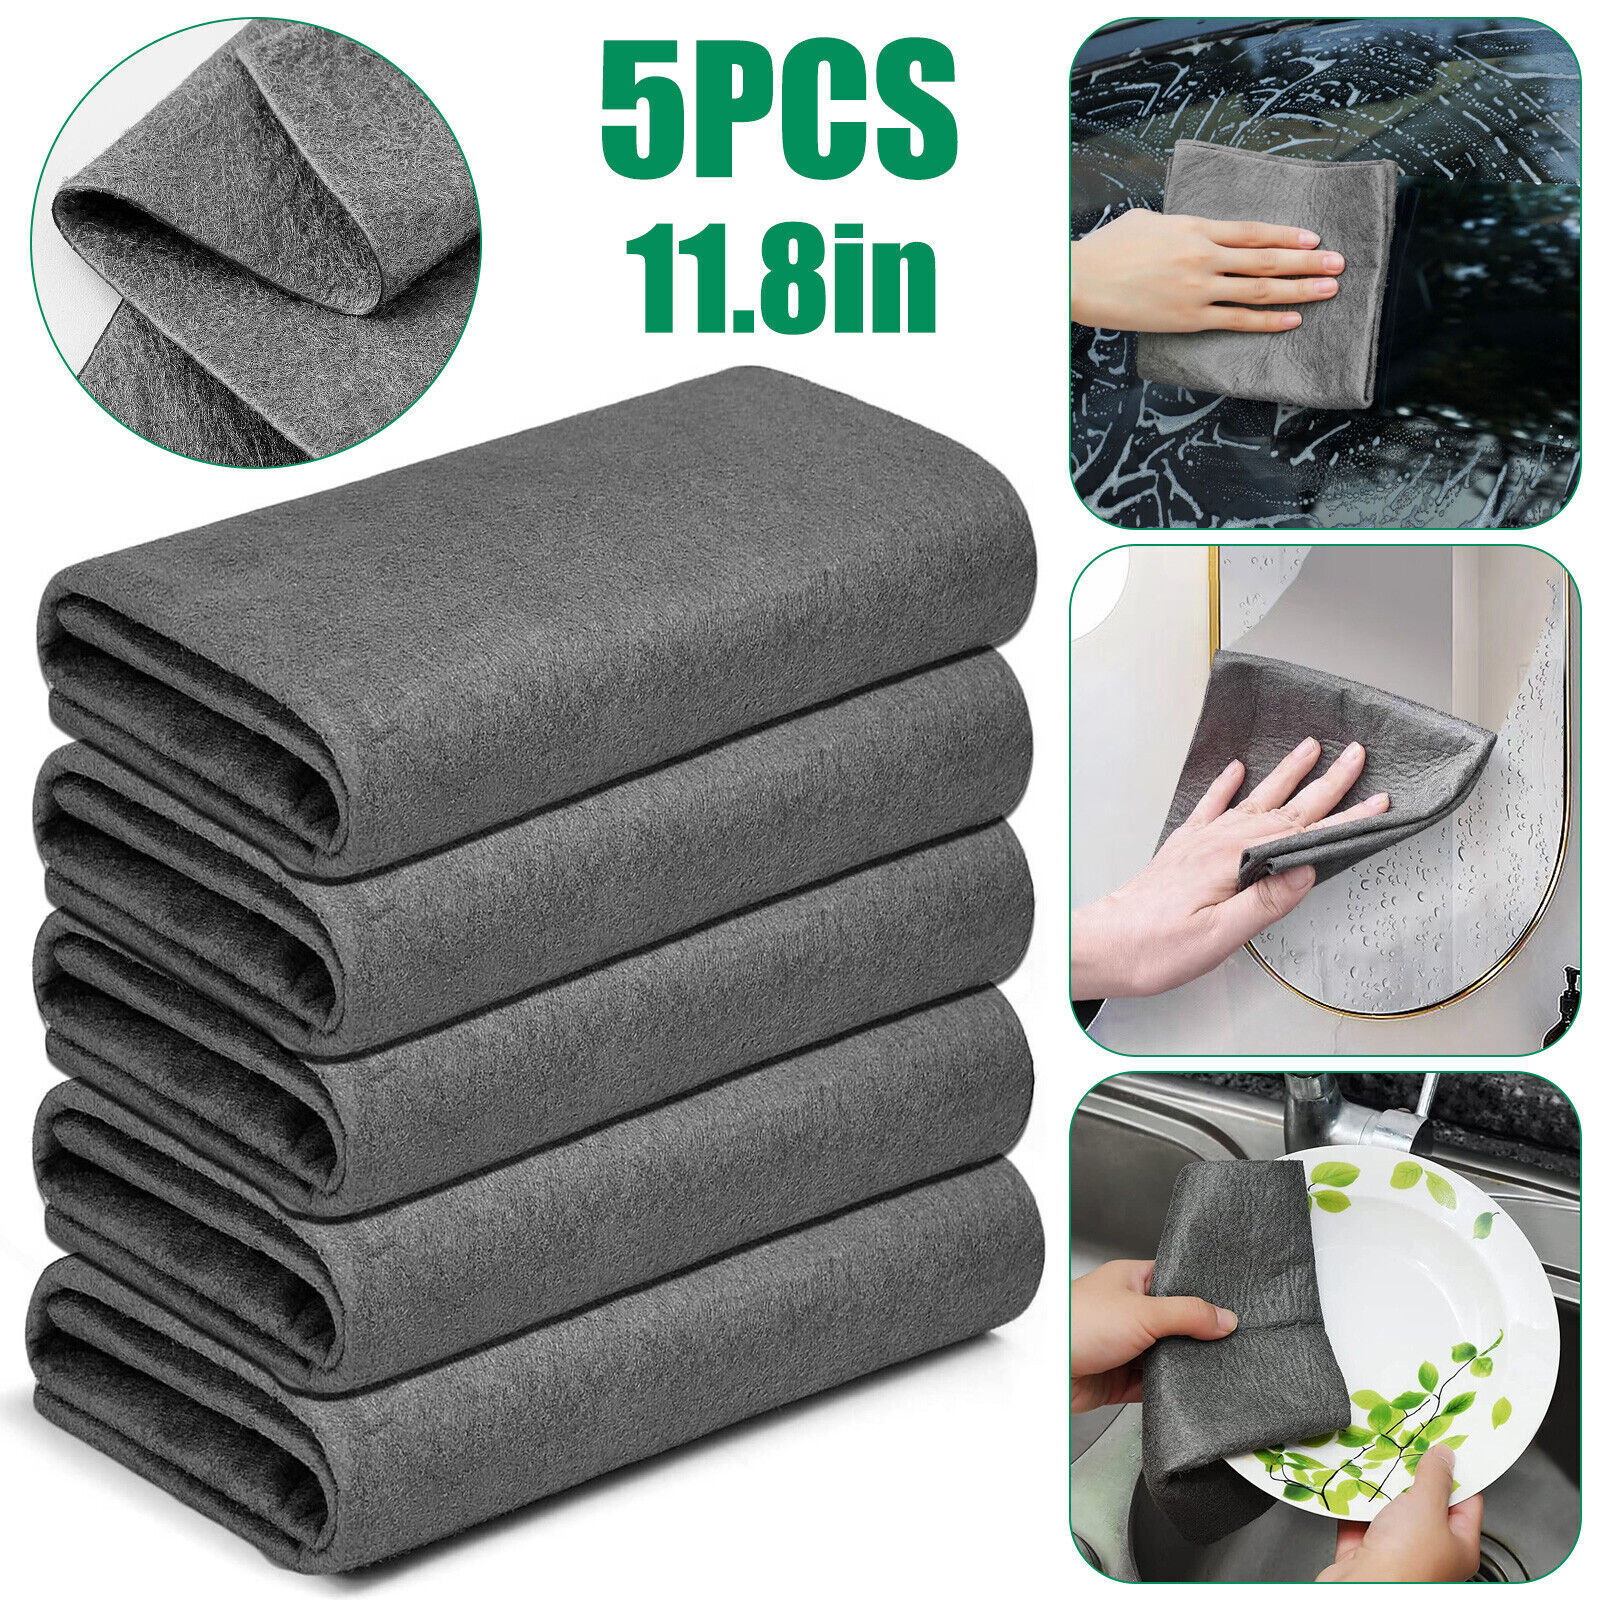 

5pcs Cleaning Cloth, Thickened Scouring Pad, Magic Cleaning Rag, Home Magic Cleaning Cloth, Reusable Microfiber Cleaning Rag